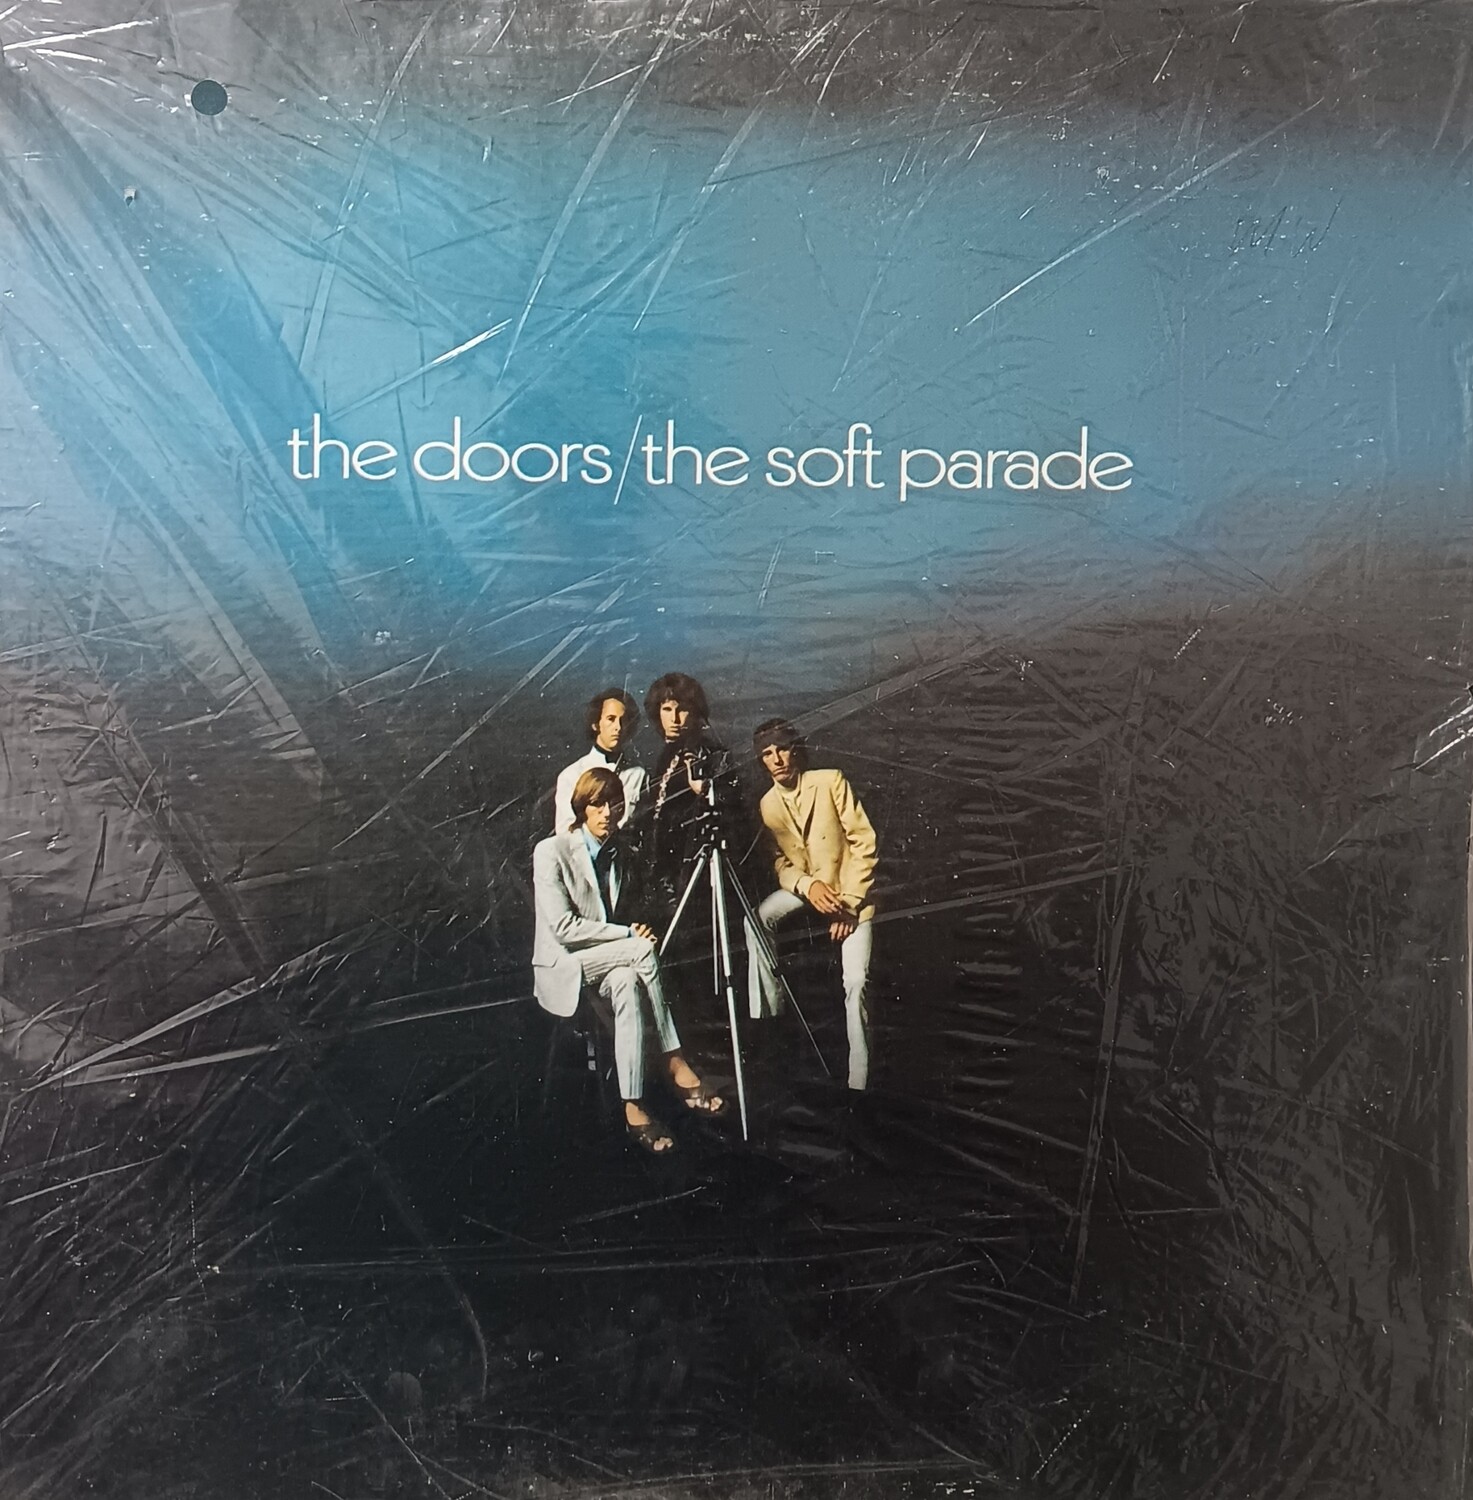 THE DOORS - The soft parade